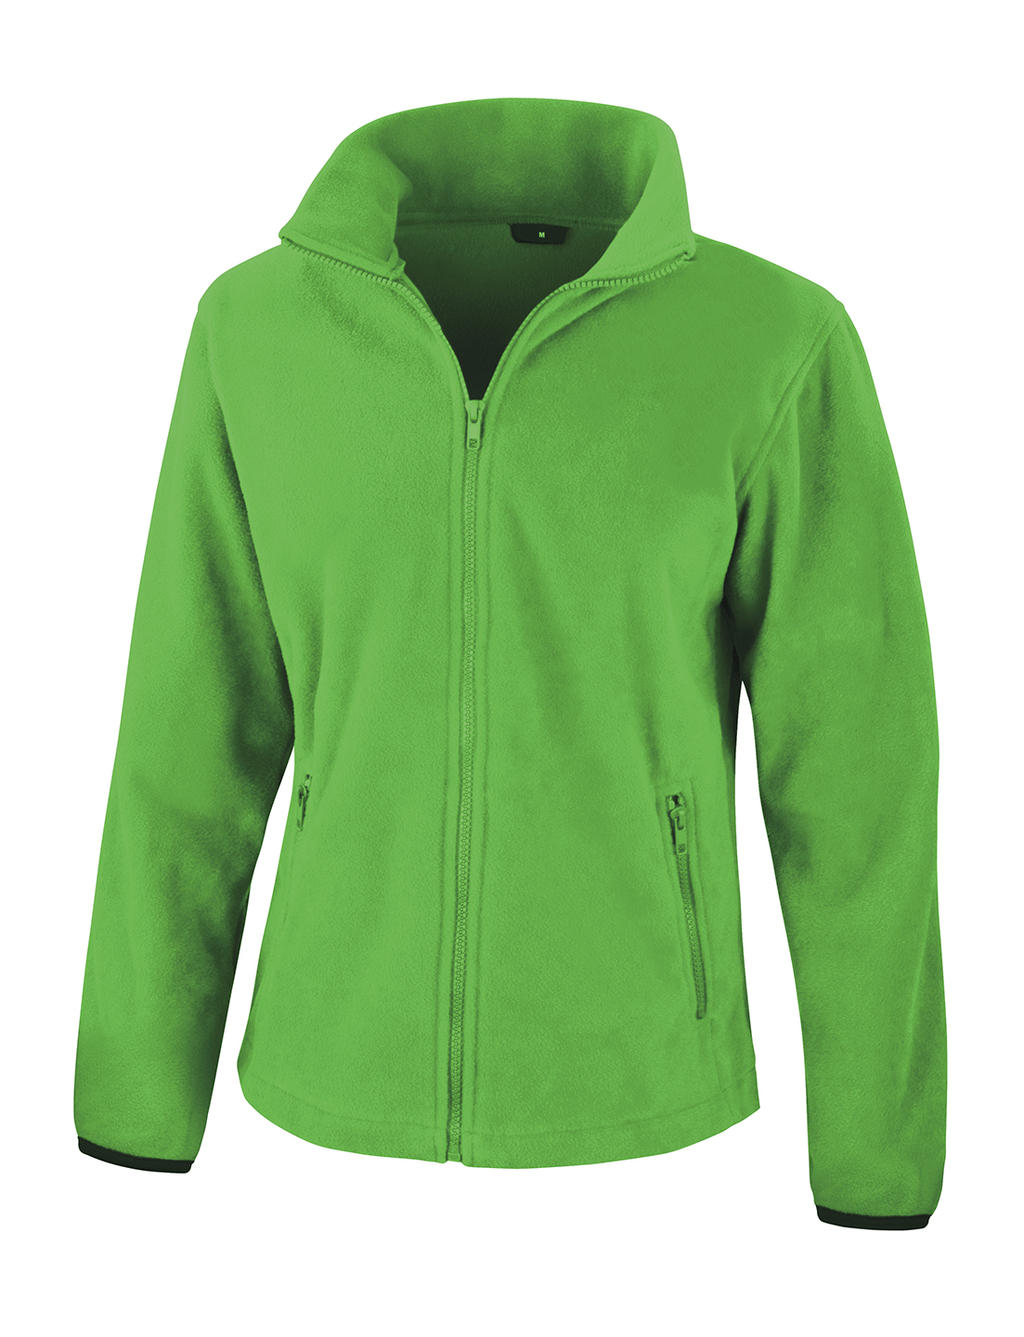  Womens Fashion Fit Outdoor Fleece in Farbe Vivid Green